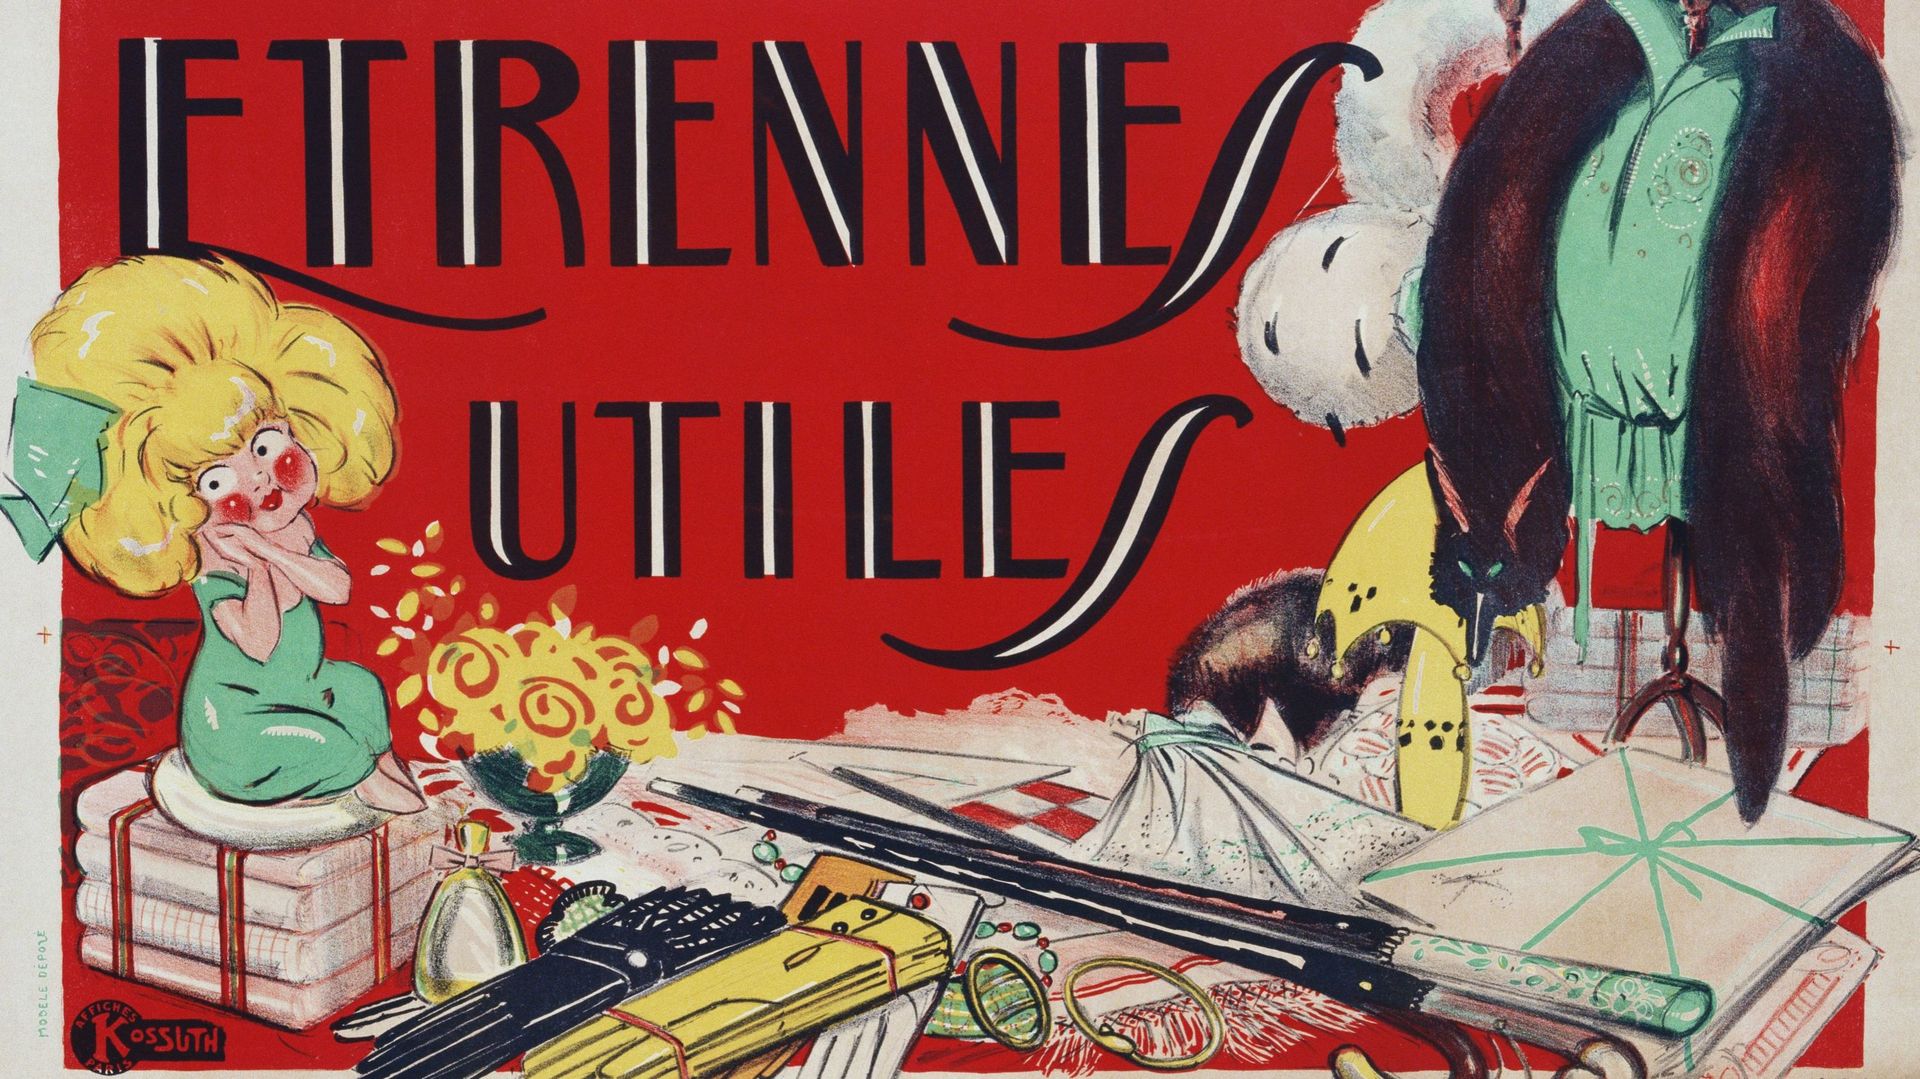 French Fashion Poster for Etrennes Utiles by Marcel Bloch